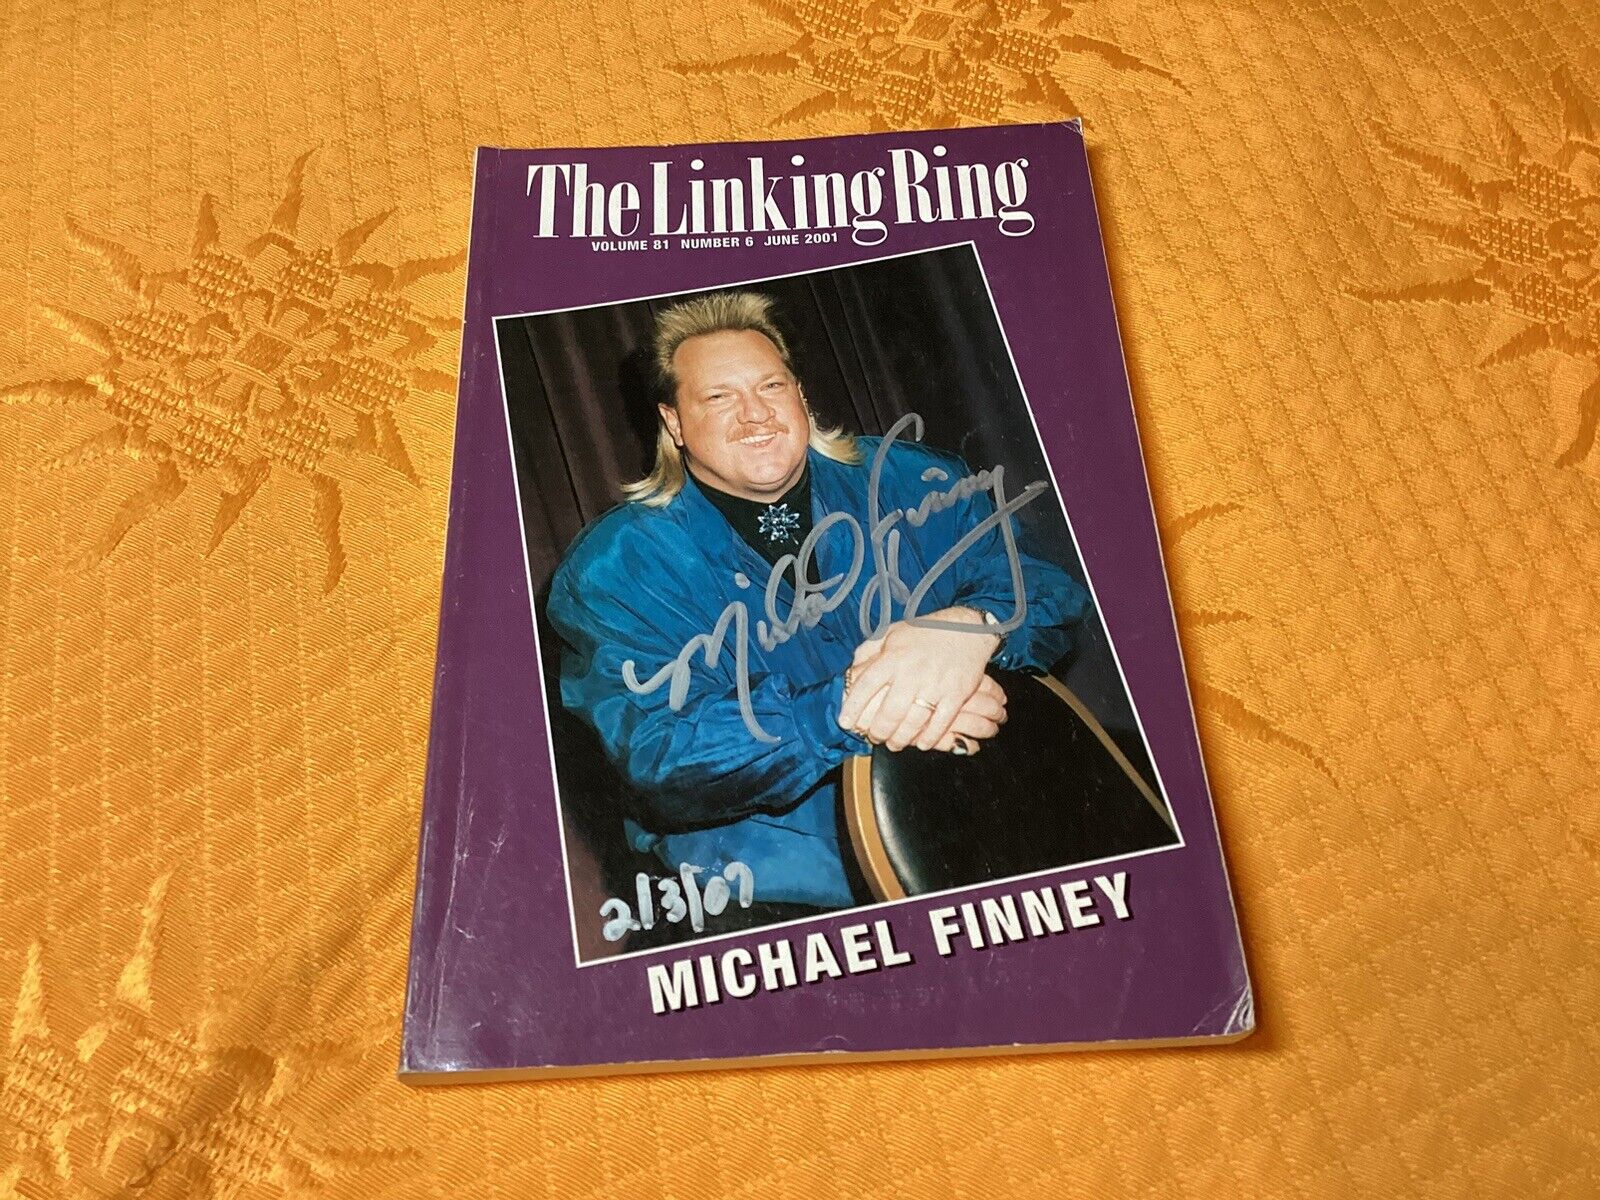 The Linking Ring June 2001 Michael Finney Autographed Issue